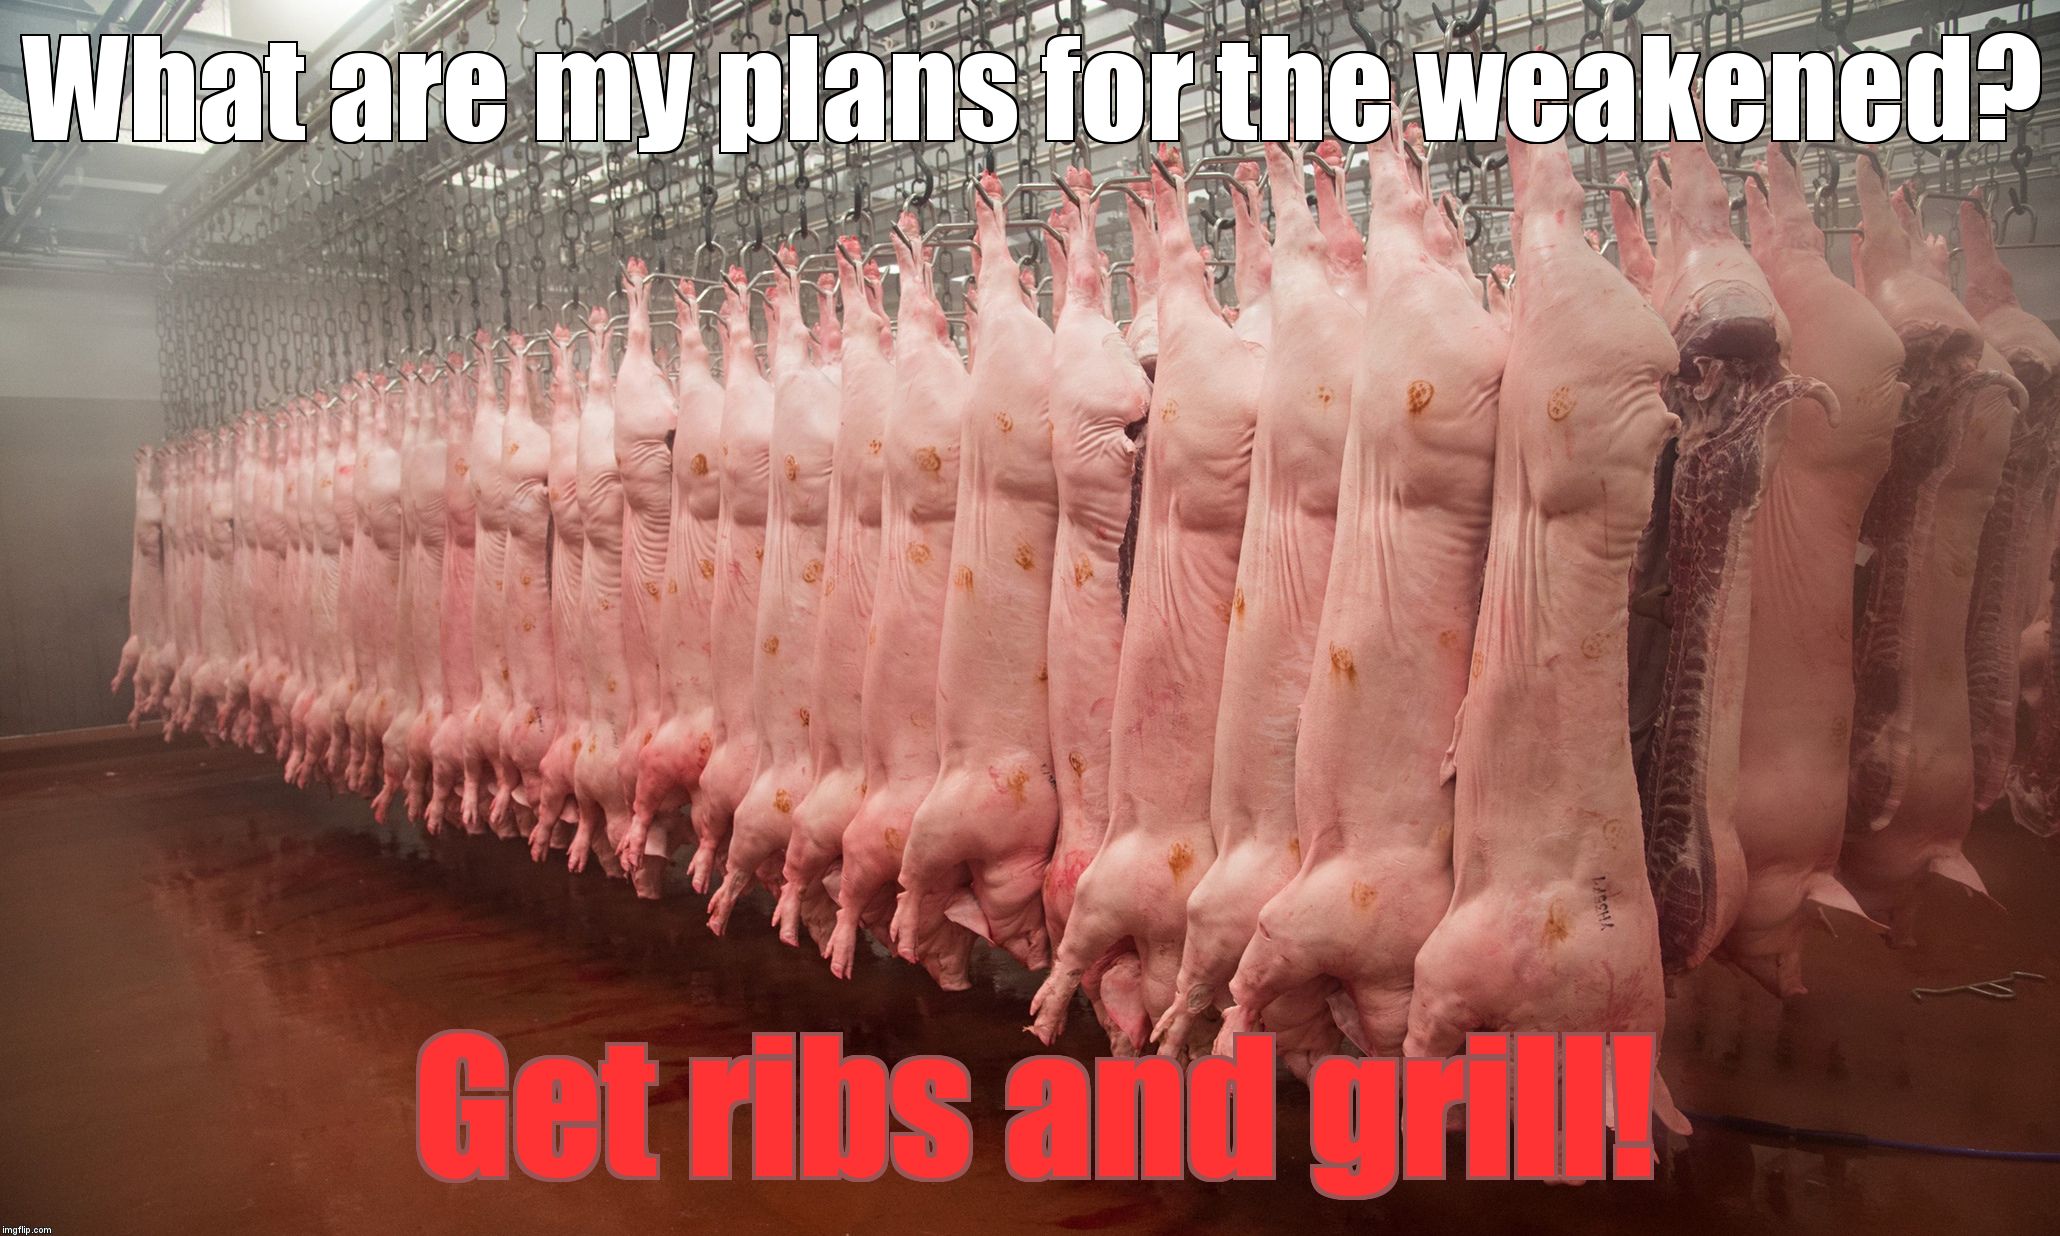 (1+1)<3. Bacon>Pigs. Food=Poop. | What are my plans for the weakened? Get ribs and grill! | image tagged in math for dummies,netflix and chill | made w/ Imgflip meme maker